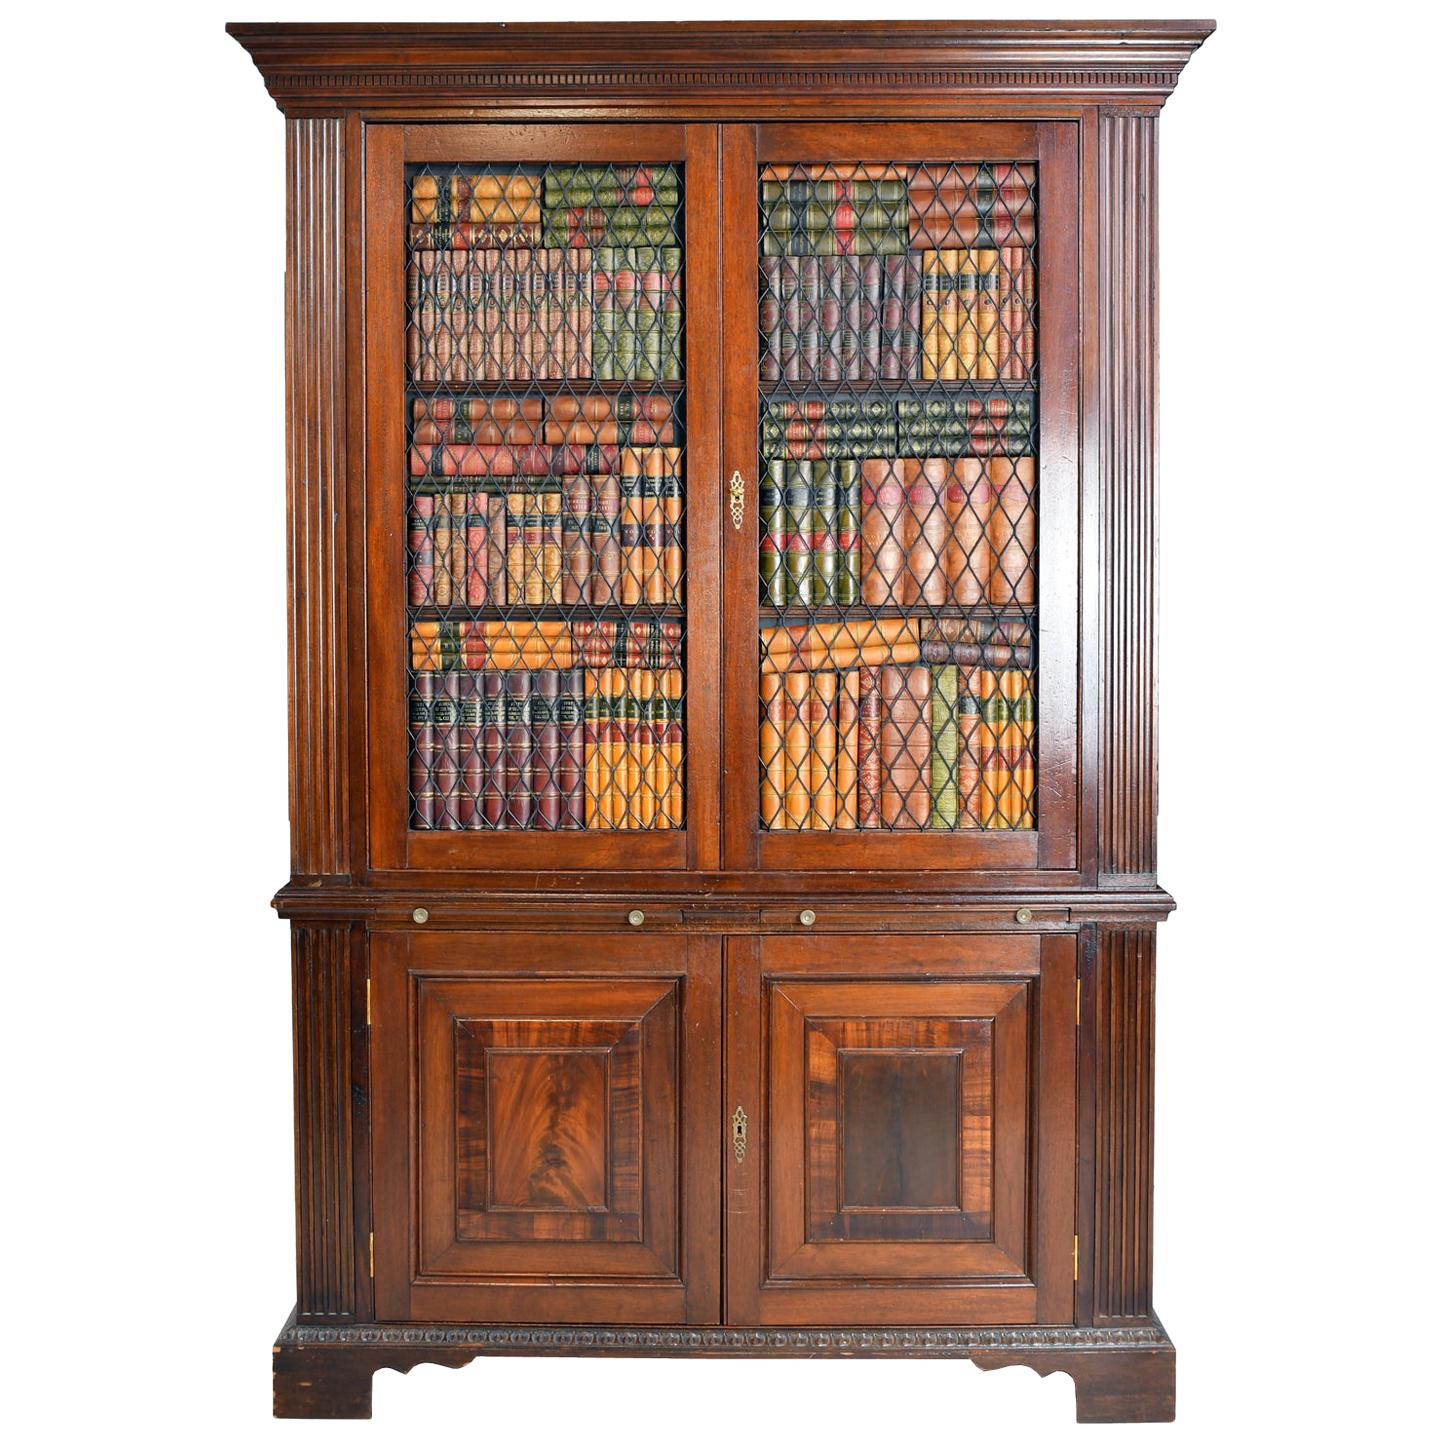 Decorative Faux Bookcase Cabinet in 2 Parts, Assembled from Antique Elements For Sale